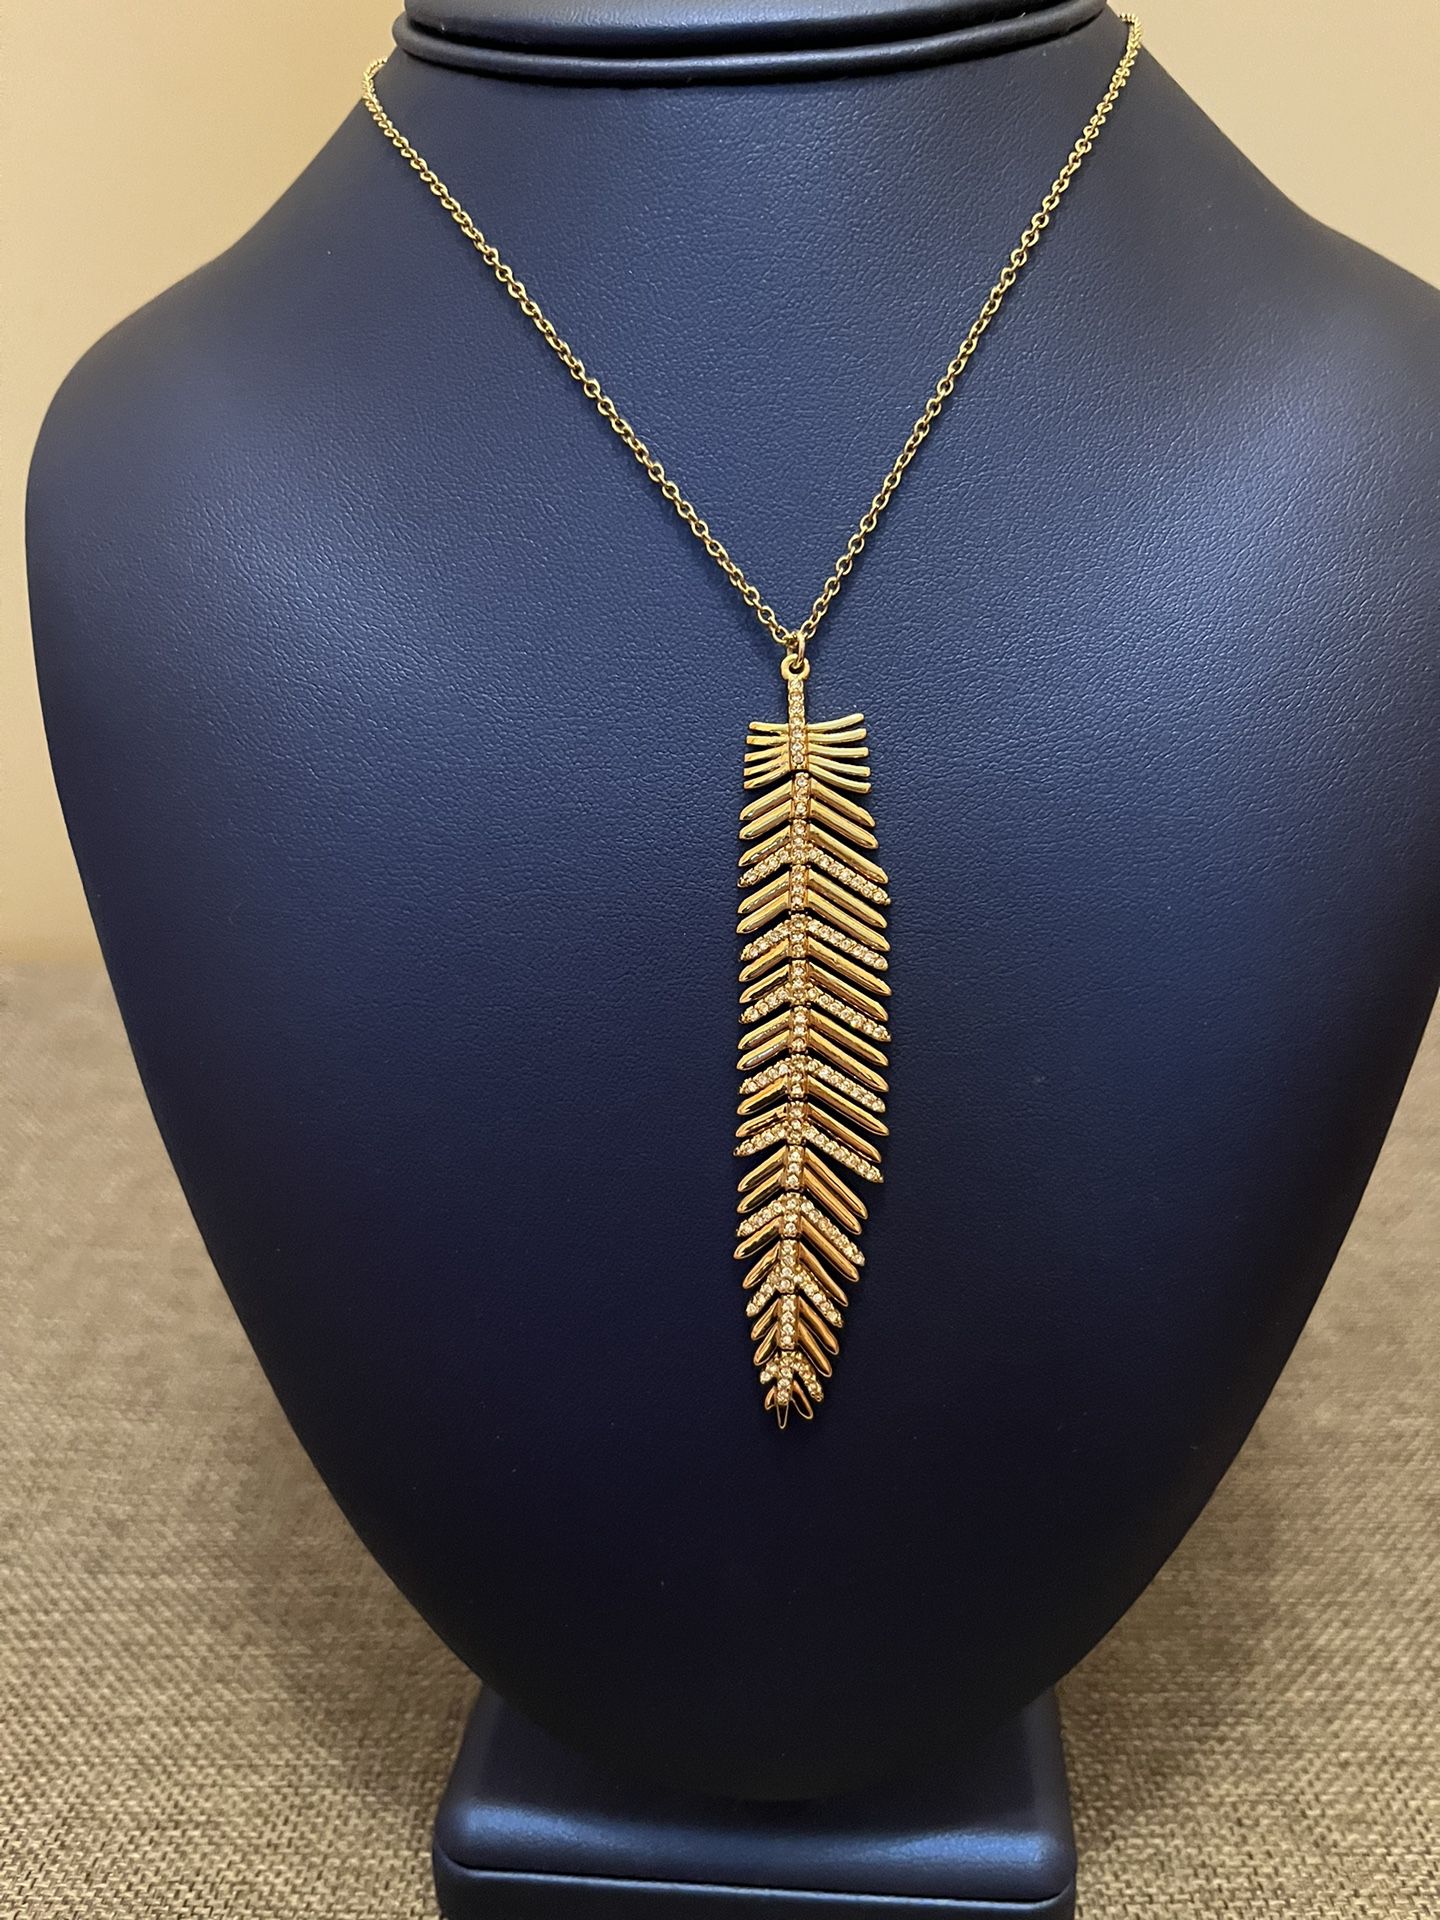 Fancy feather pendent with chain. Swarovski crystals and in gold color. The chain is adjustable. New no tags  Very pretty item 